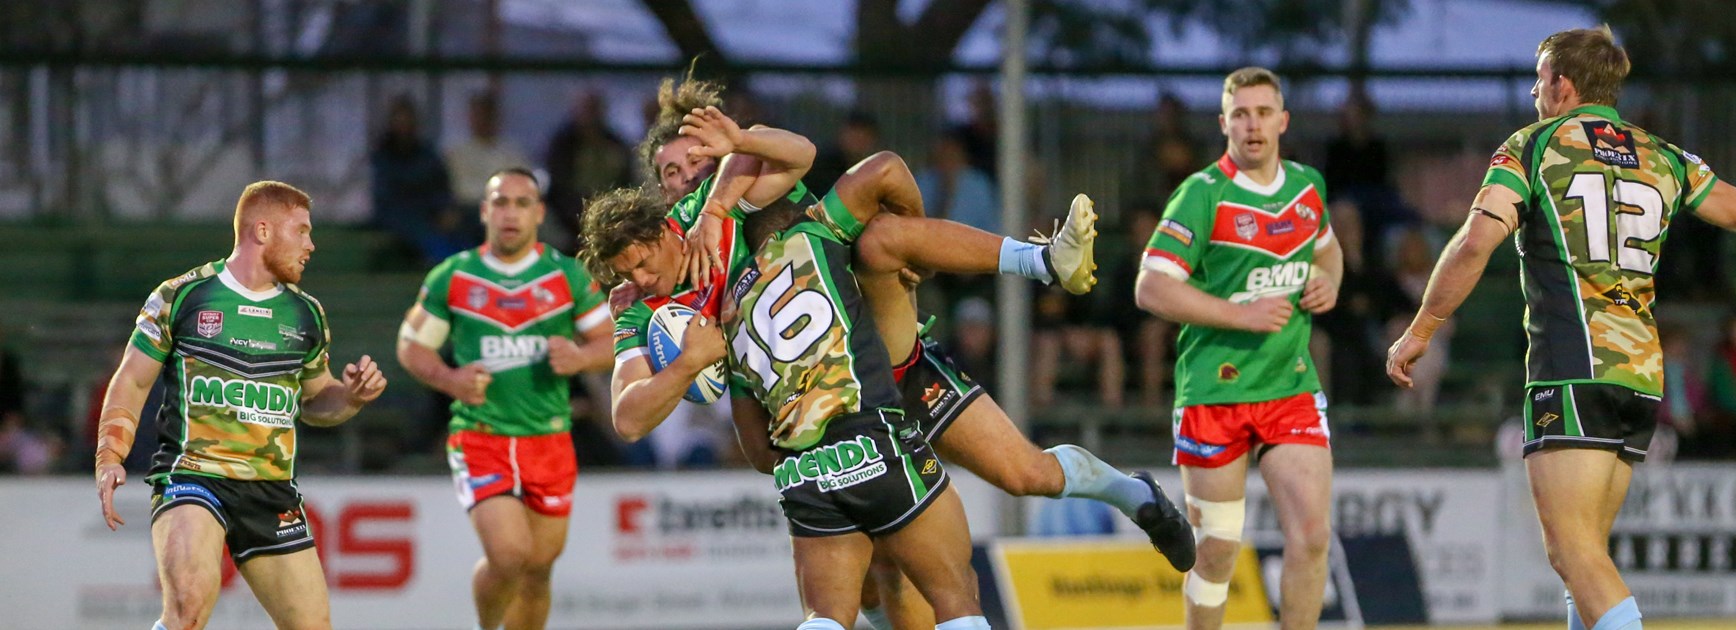 Gains and Losses for 2019: Wynnum Manly Seagulls